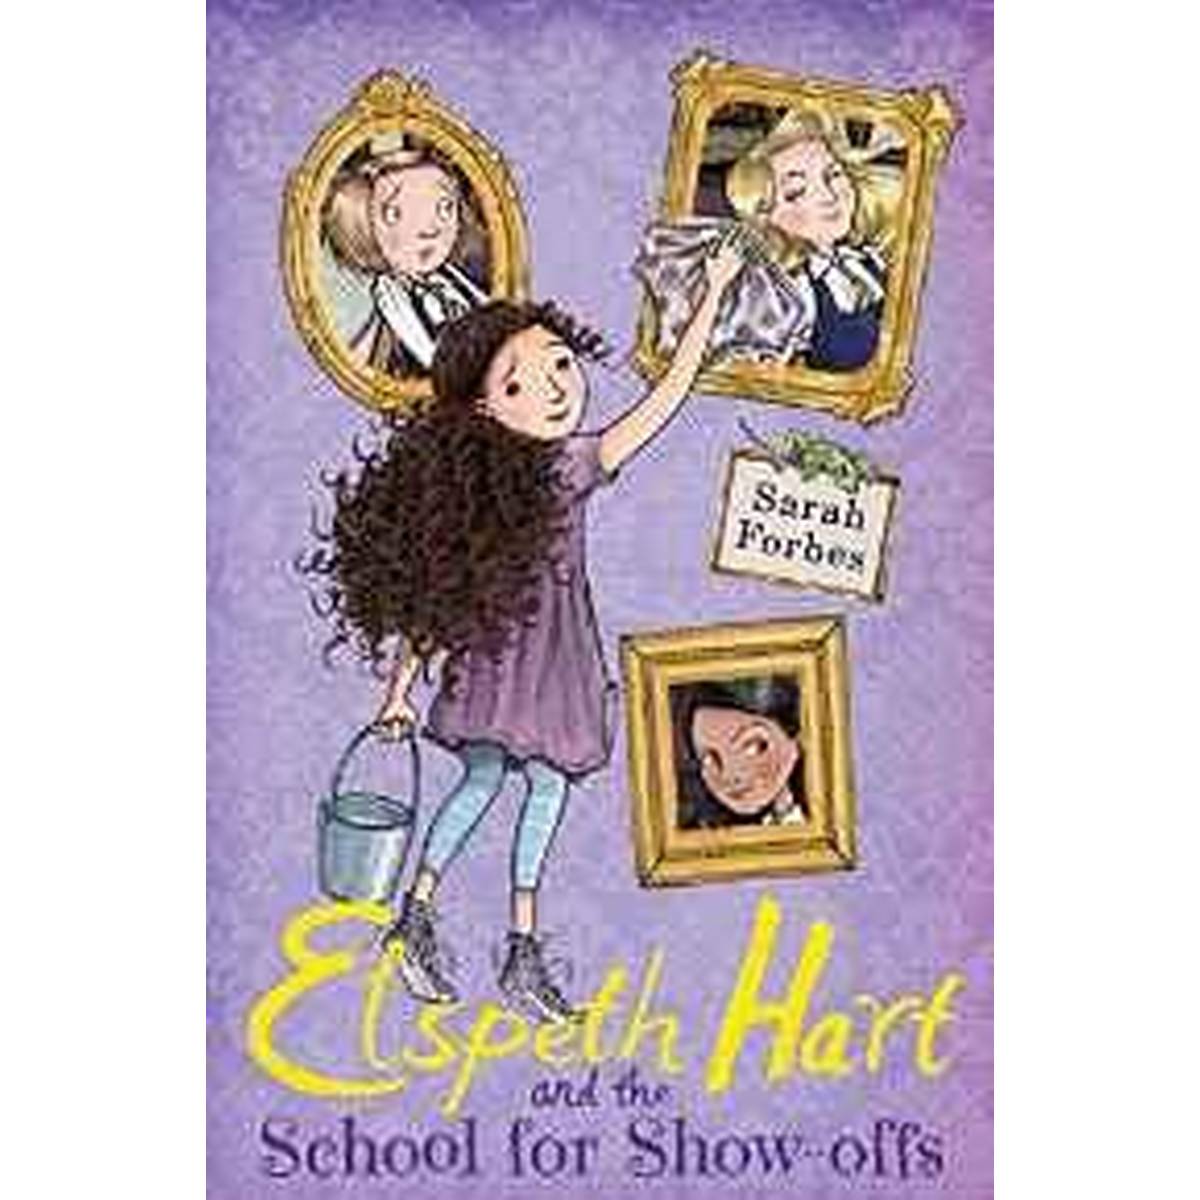 Elspeth Hart and the School for Show-Offs